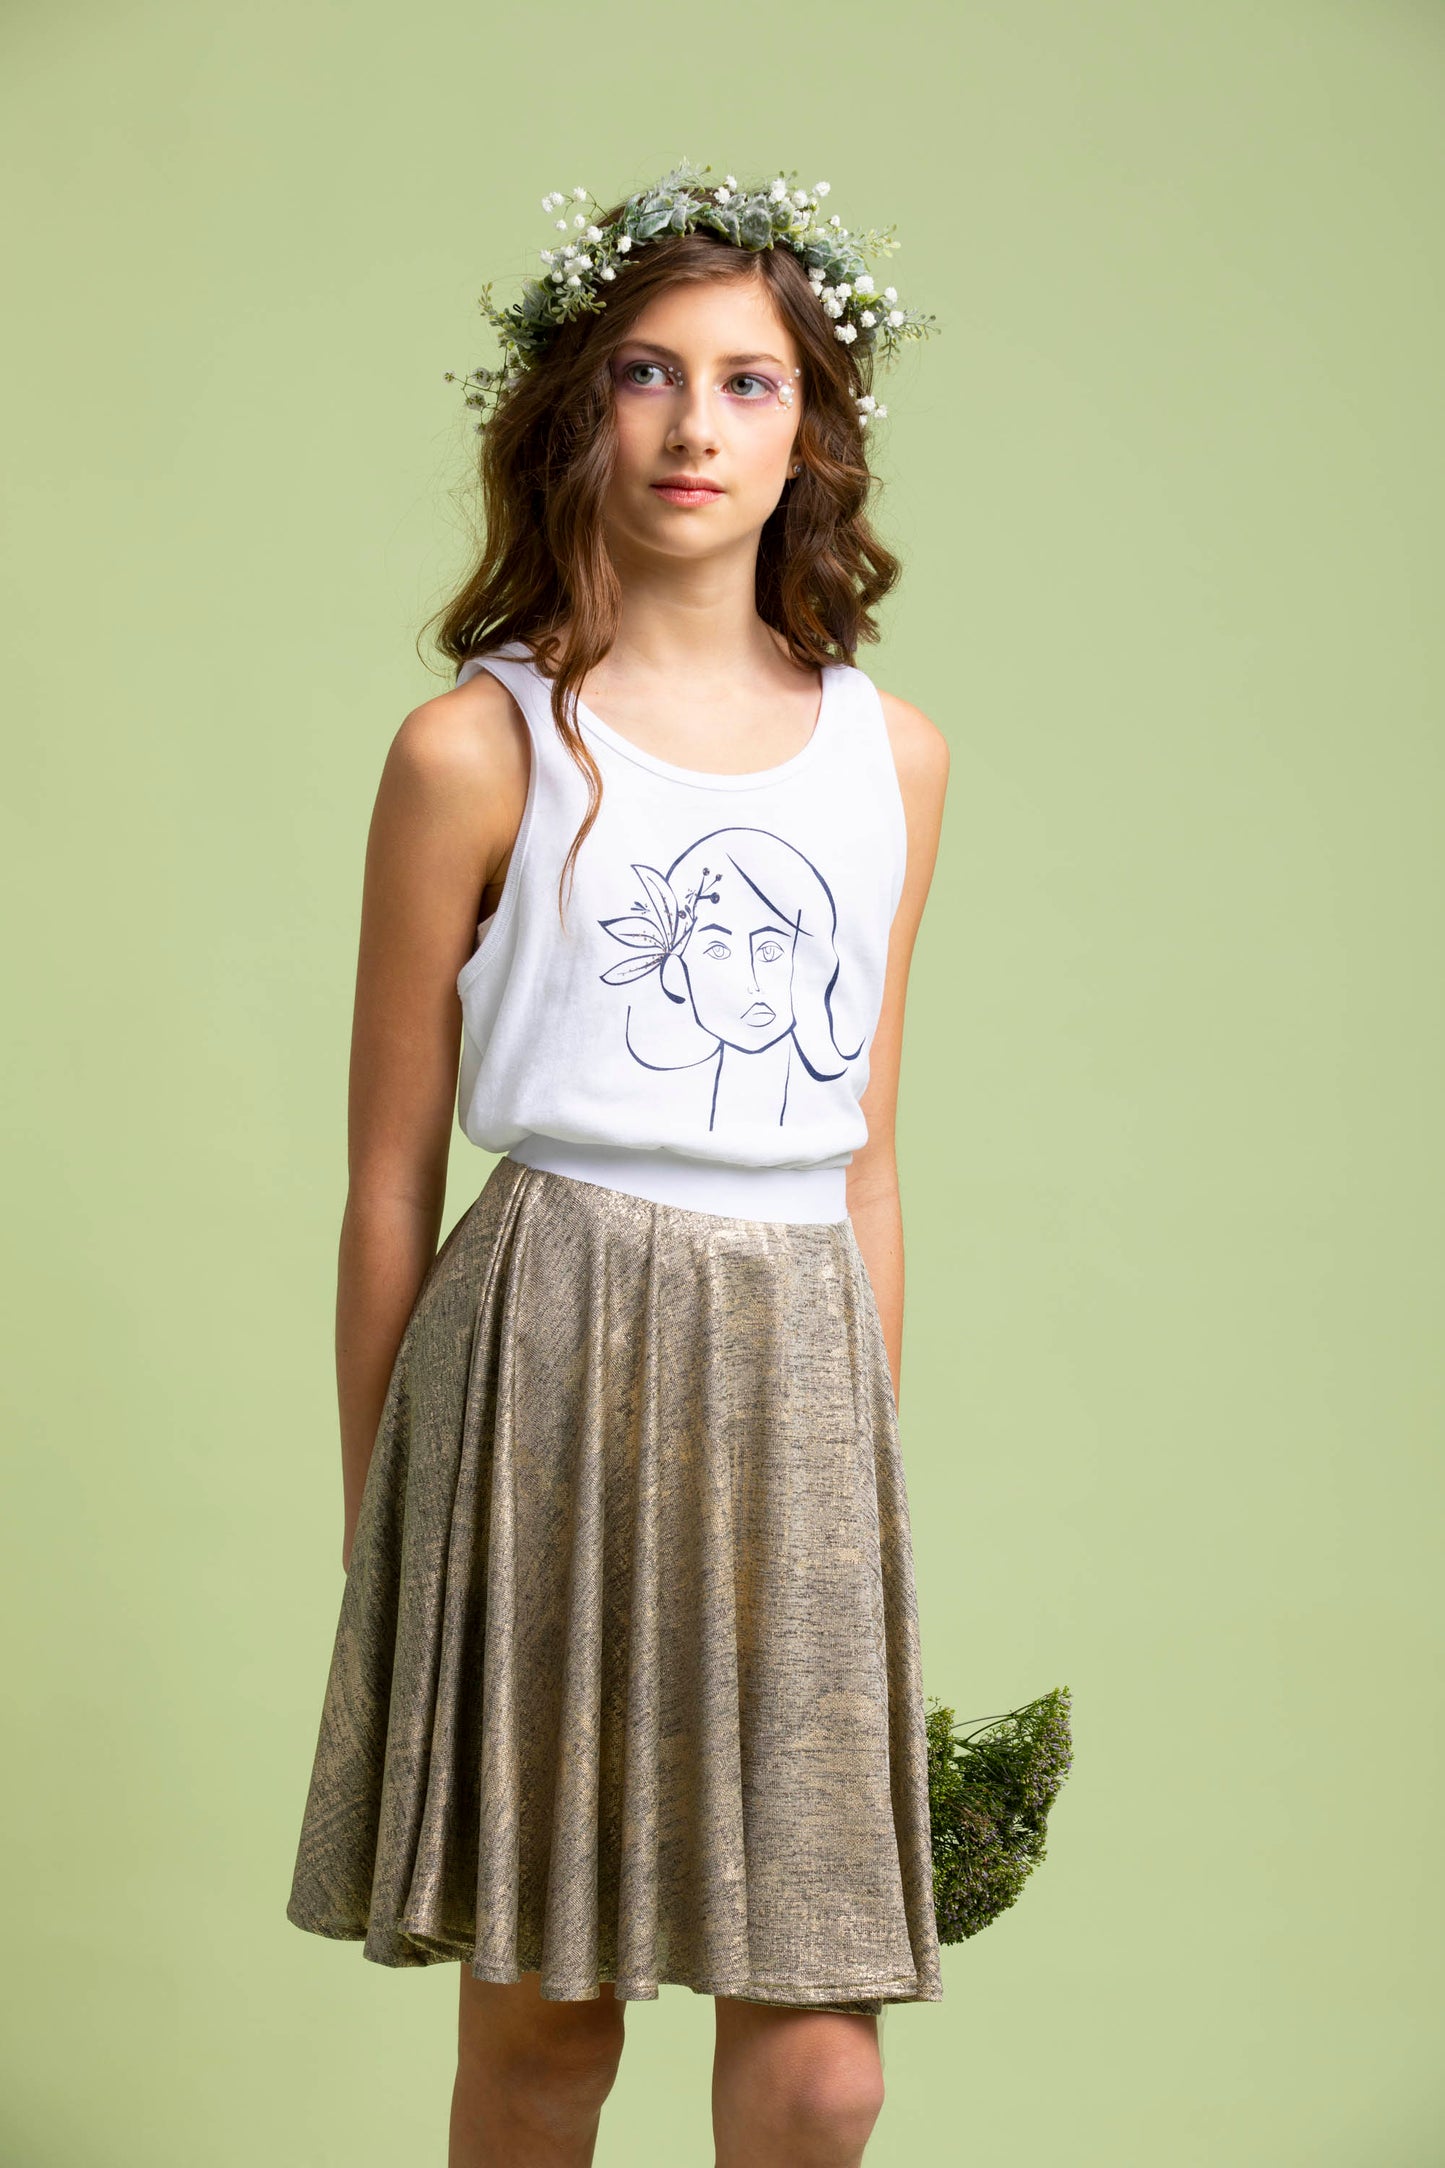 Holding some greenery behind her, a young lady wears her gold knit Mercedes Skirt and Ofelia T-Shirt